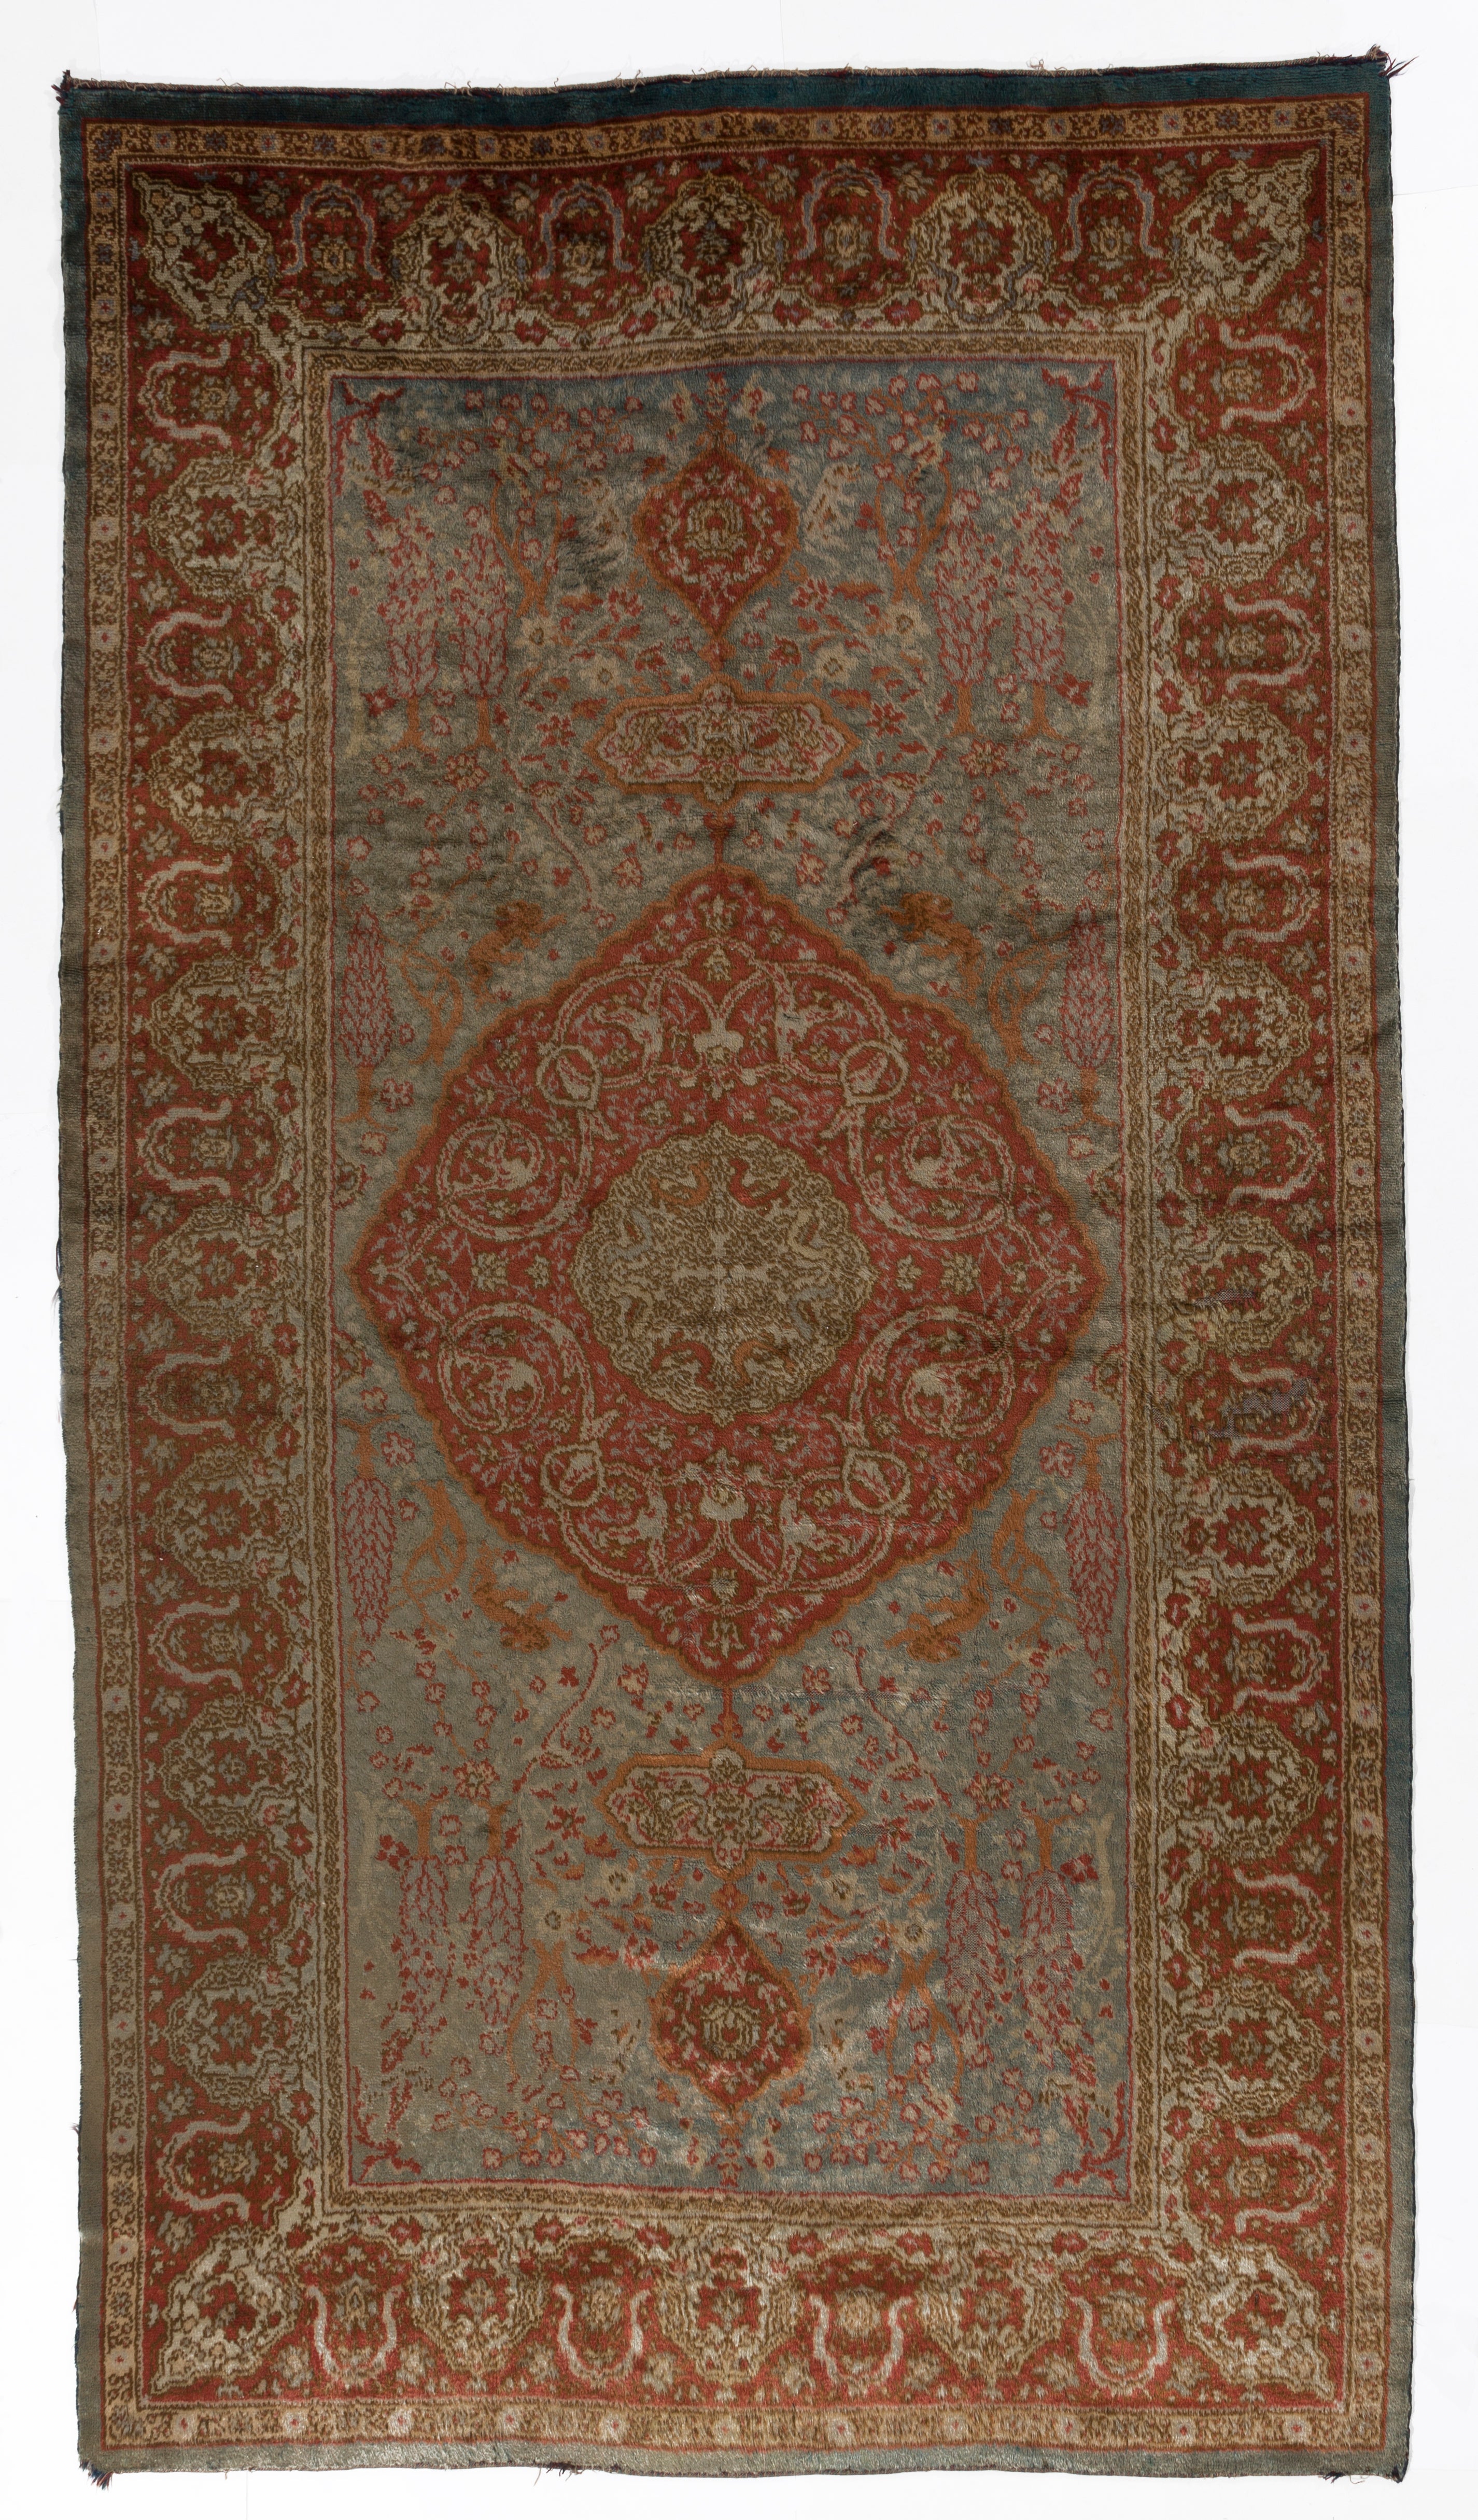 6.6x11.5 Ft Rare Antique Double Sided "Angora" Wool Oushak Rug, Ca 1890 For Sale